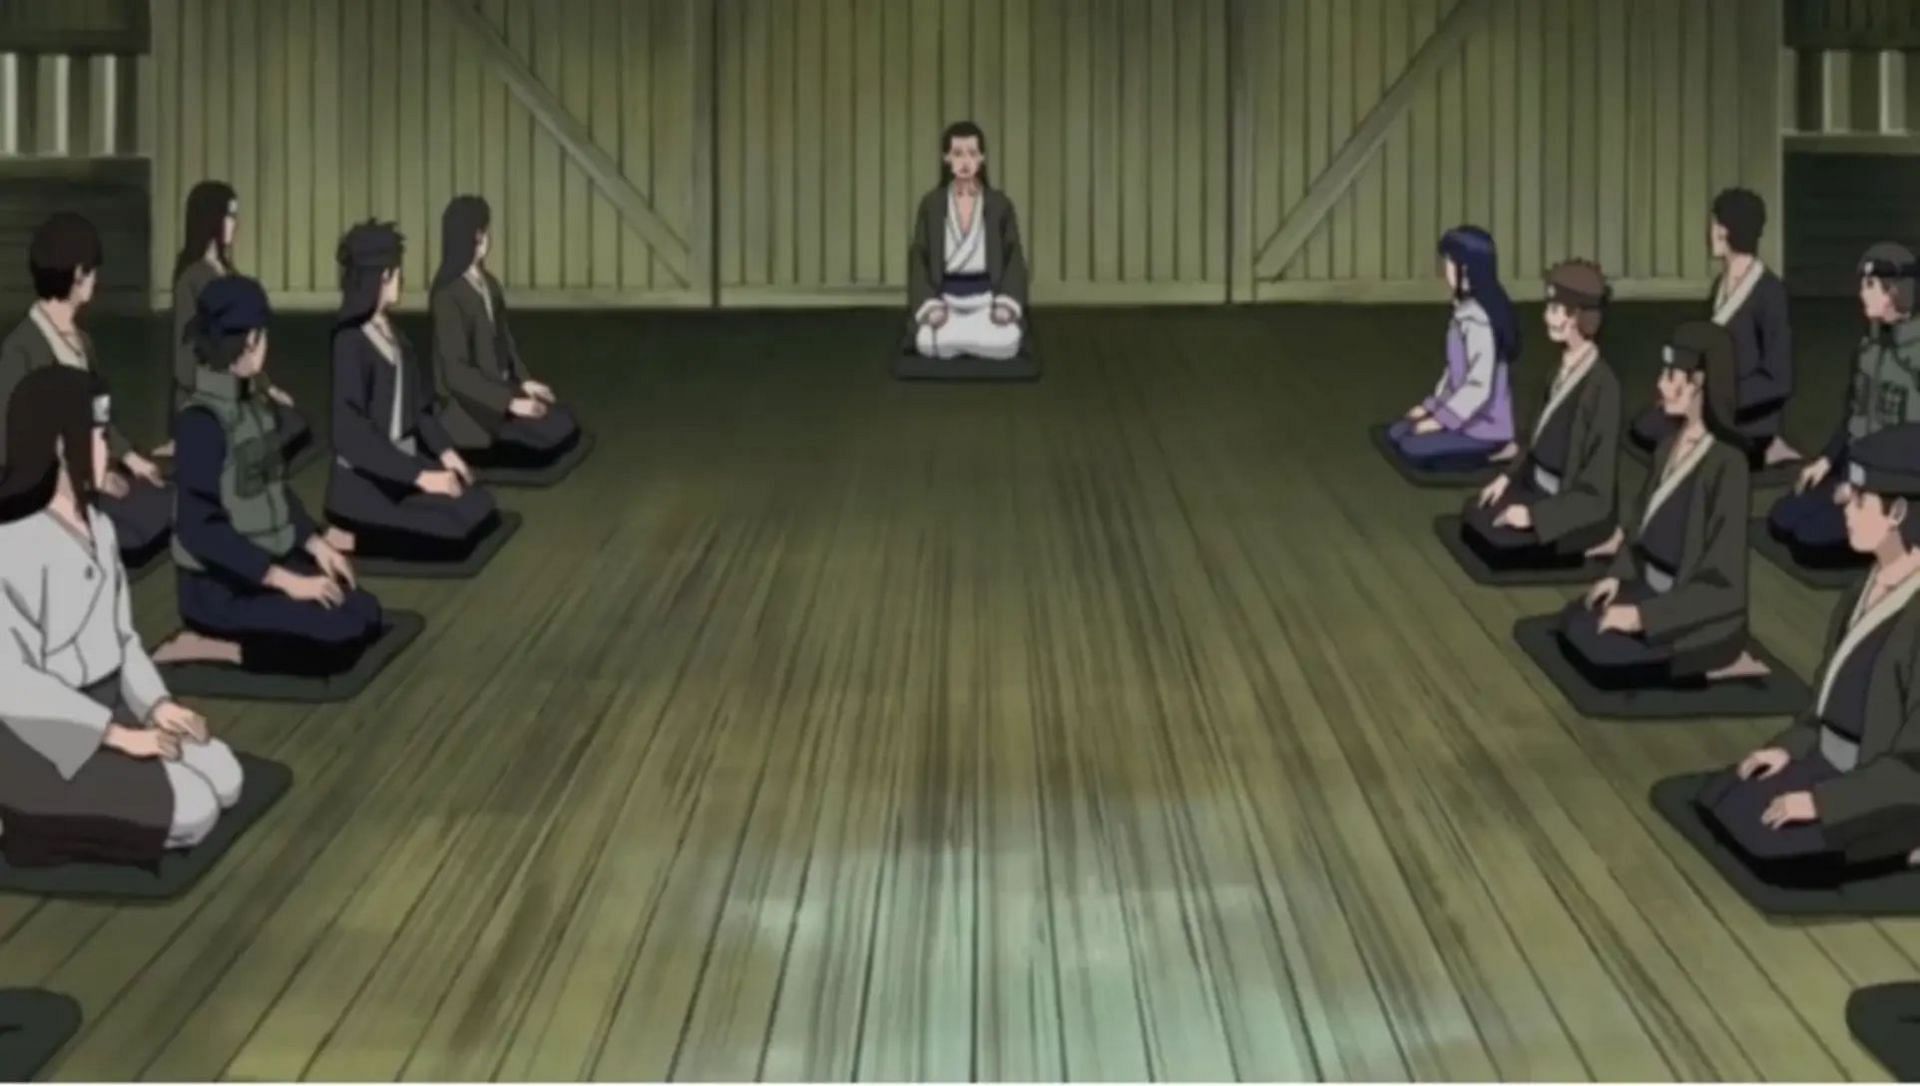 The Hyuga Clan gathered together for a meeting (Image via Pierrot Studios)